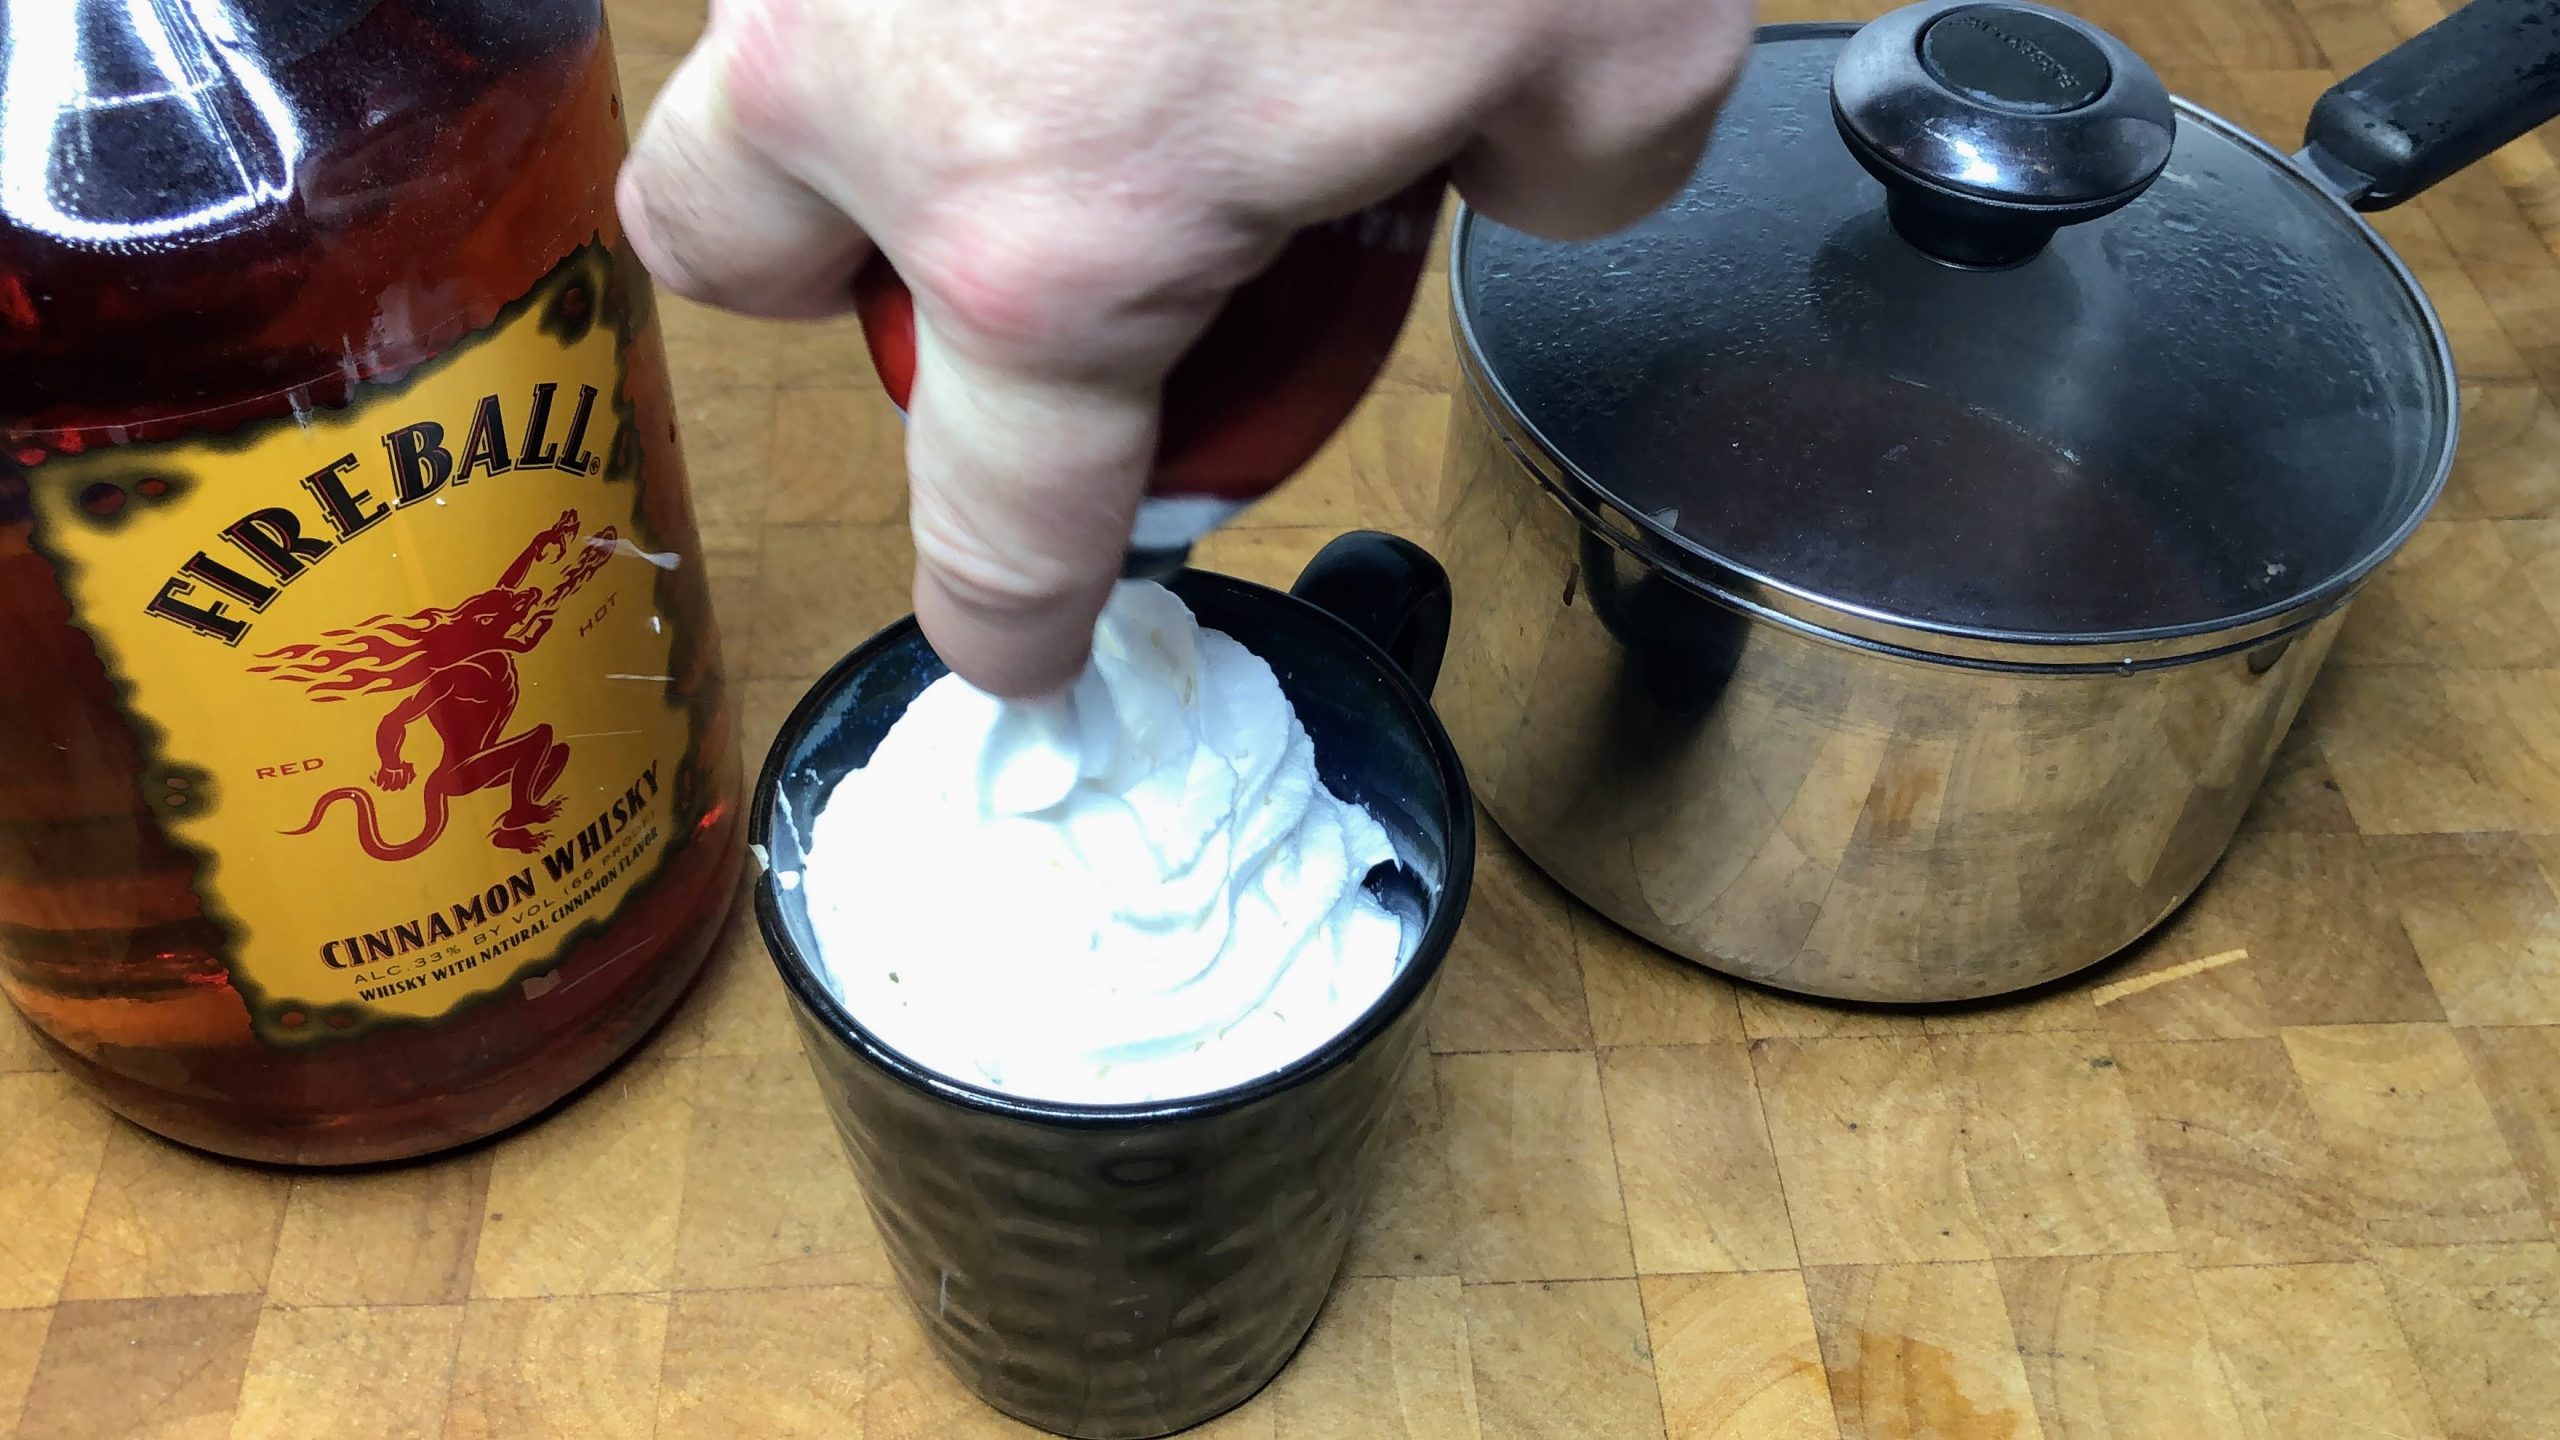 Adding whipped cream on top of fireball hot chocolate.